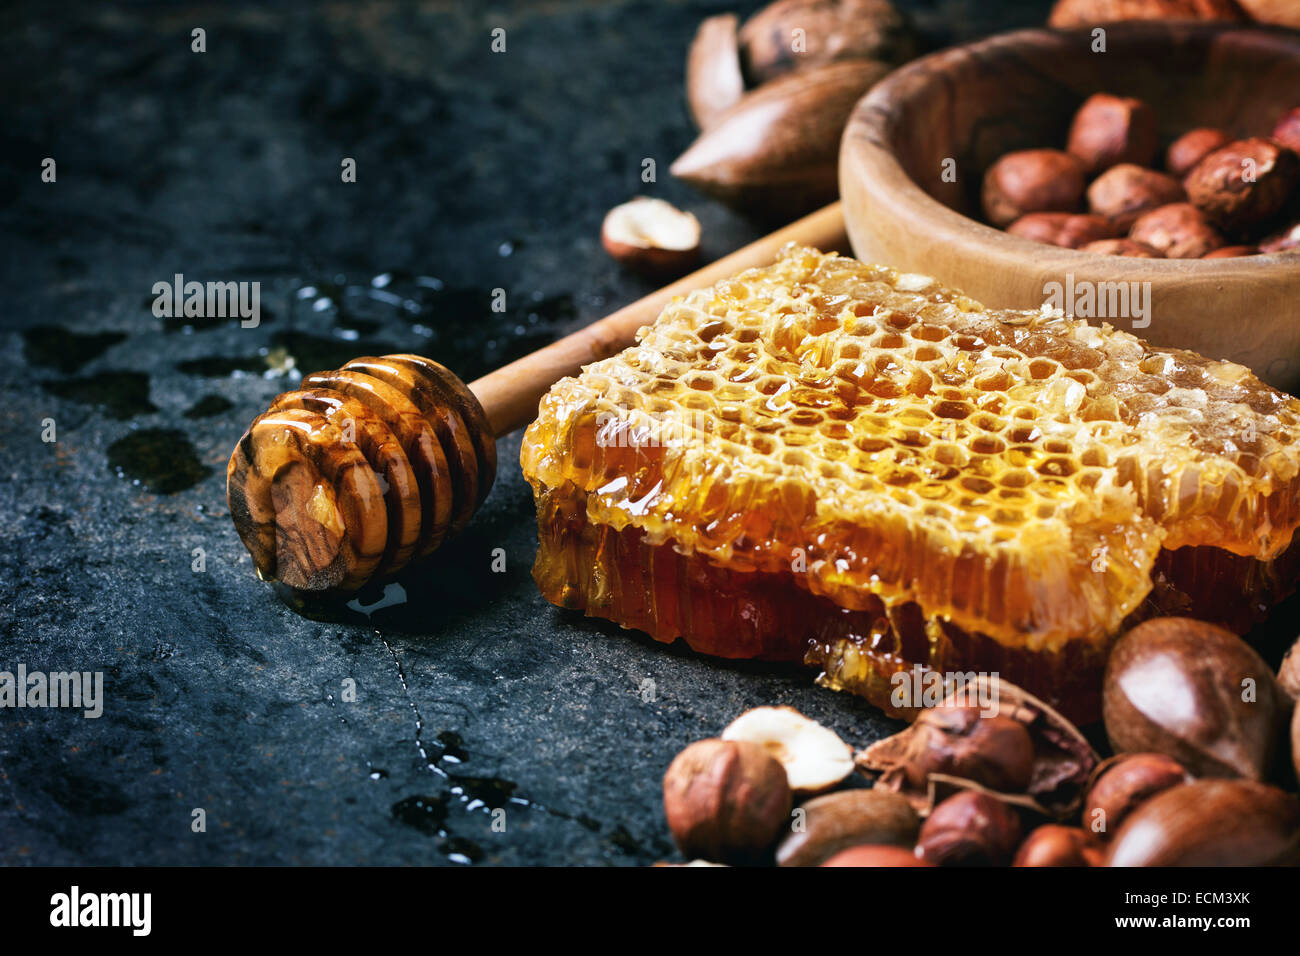 Honeycomb with honey dipper and mix of nuts over black surface. Stock Photo